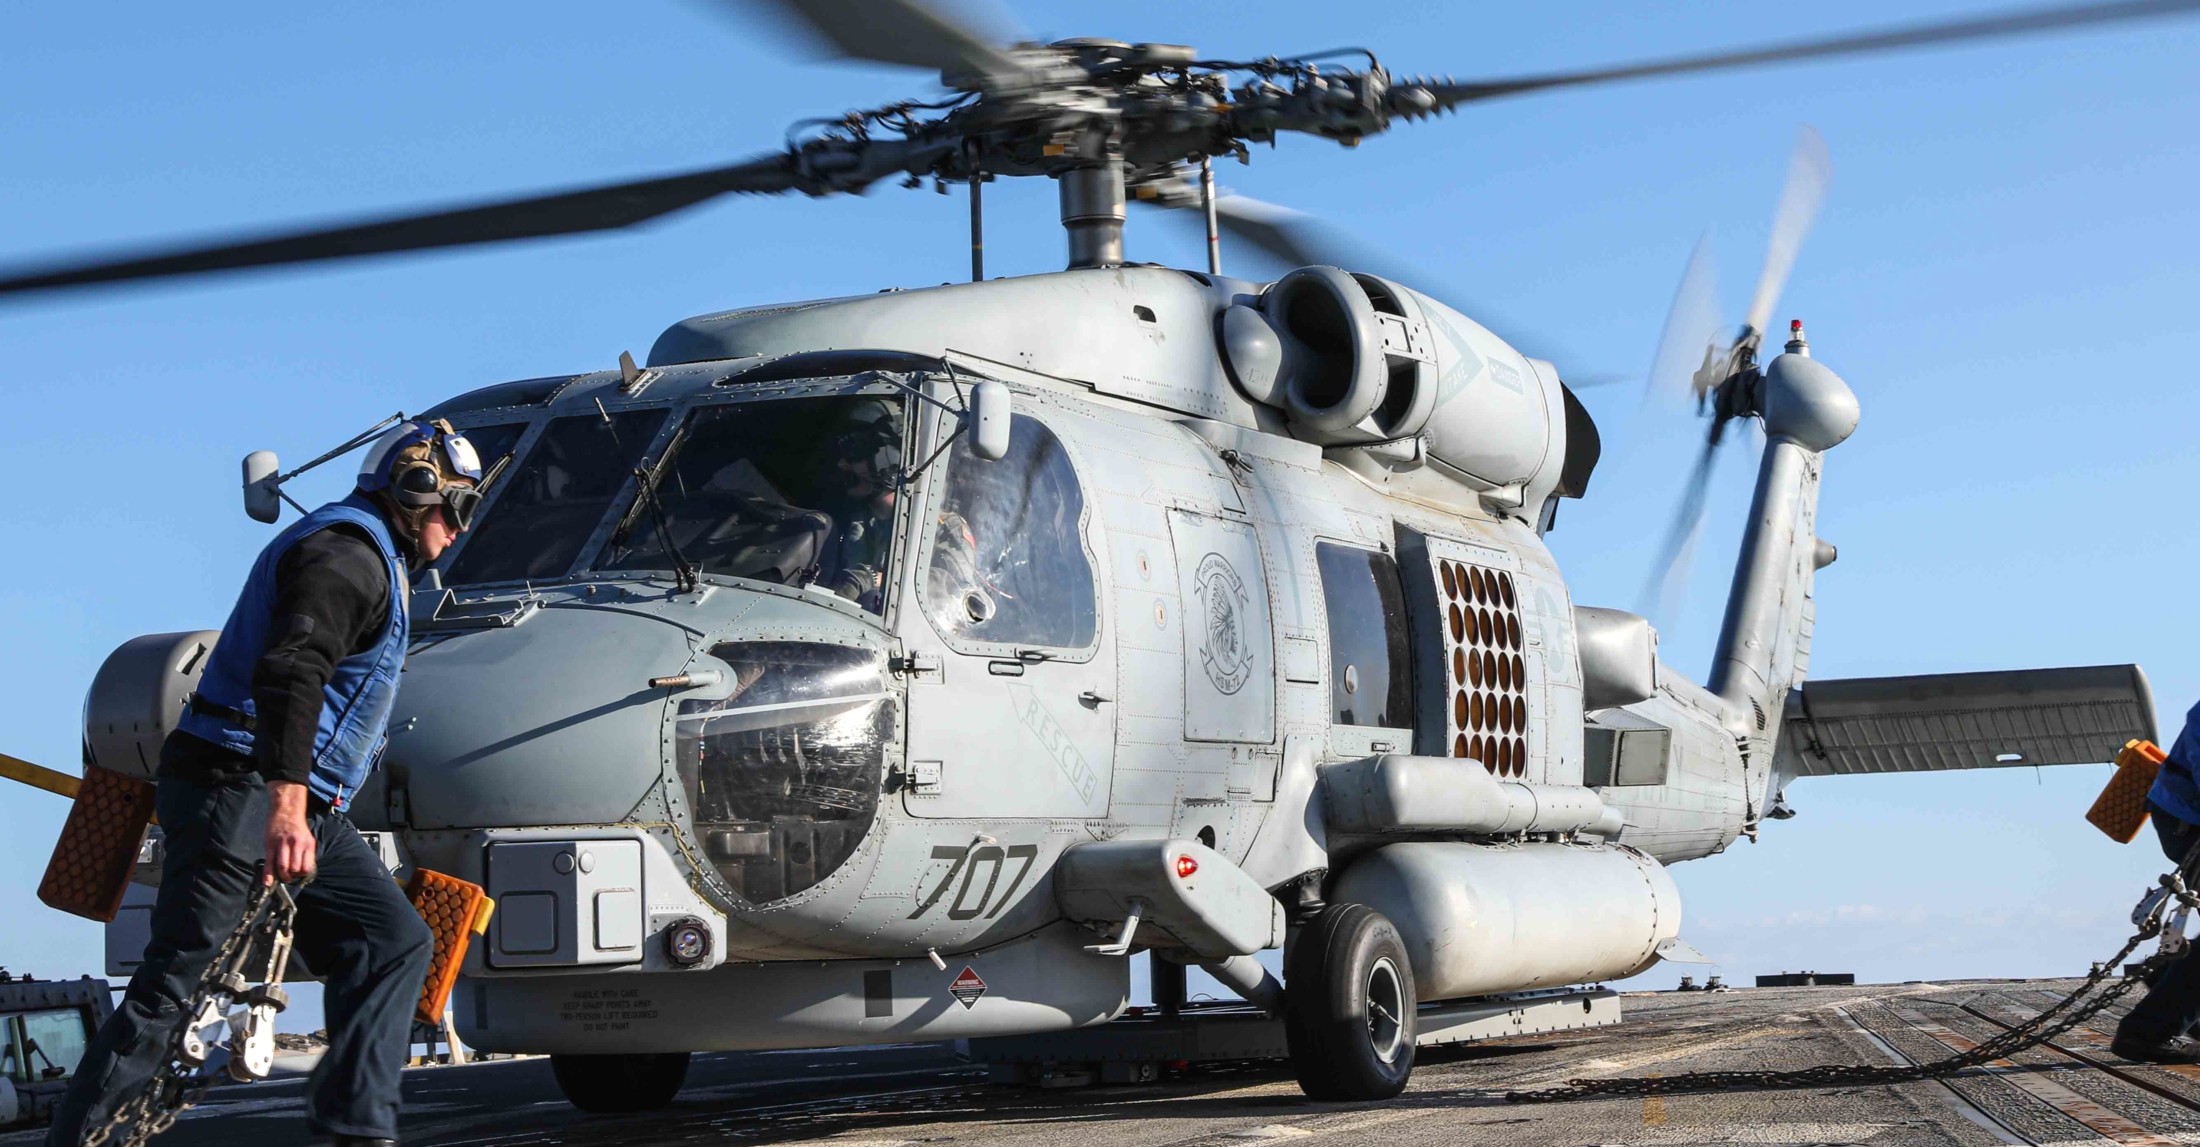 hsm-72 proud warriors helicopter maritime strike squadron mh-60r seahawk carrier air wing cvw-1 ddg-107 uss gravely 63